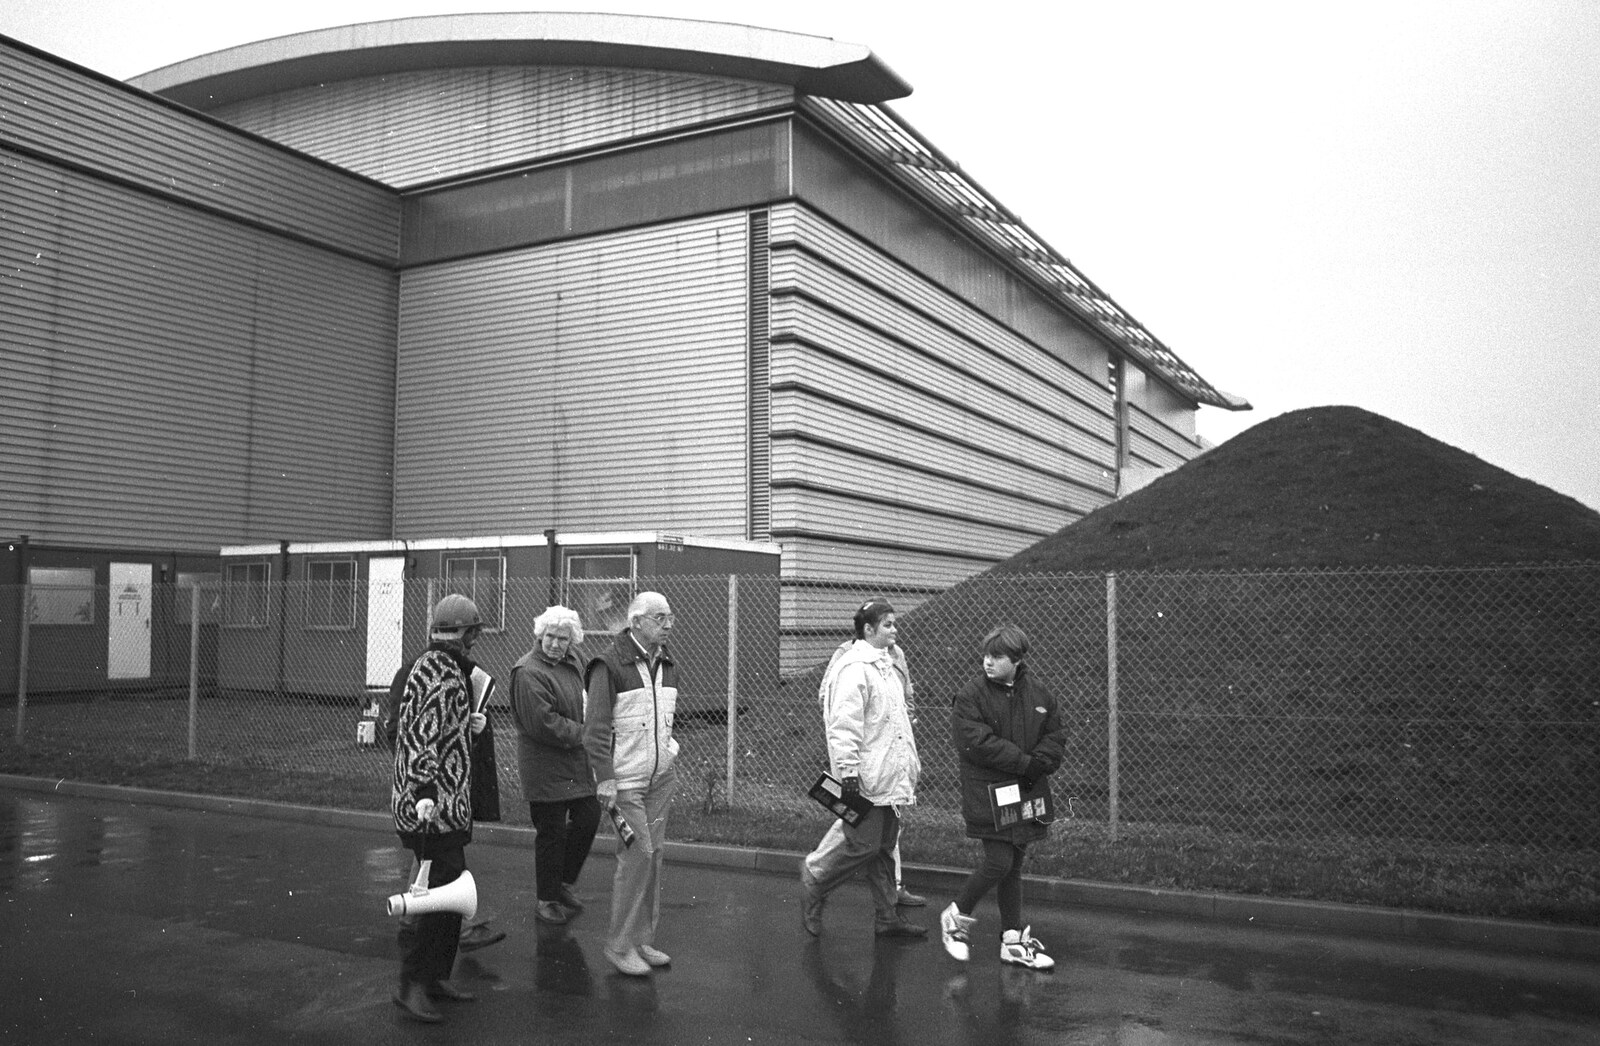 The World's First "Chicken Shit" Power Station, Brome, Eye, Suffolk - 11th July 1992: Walking back to the car park